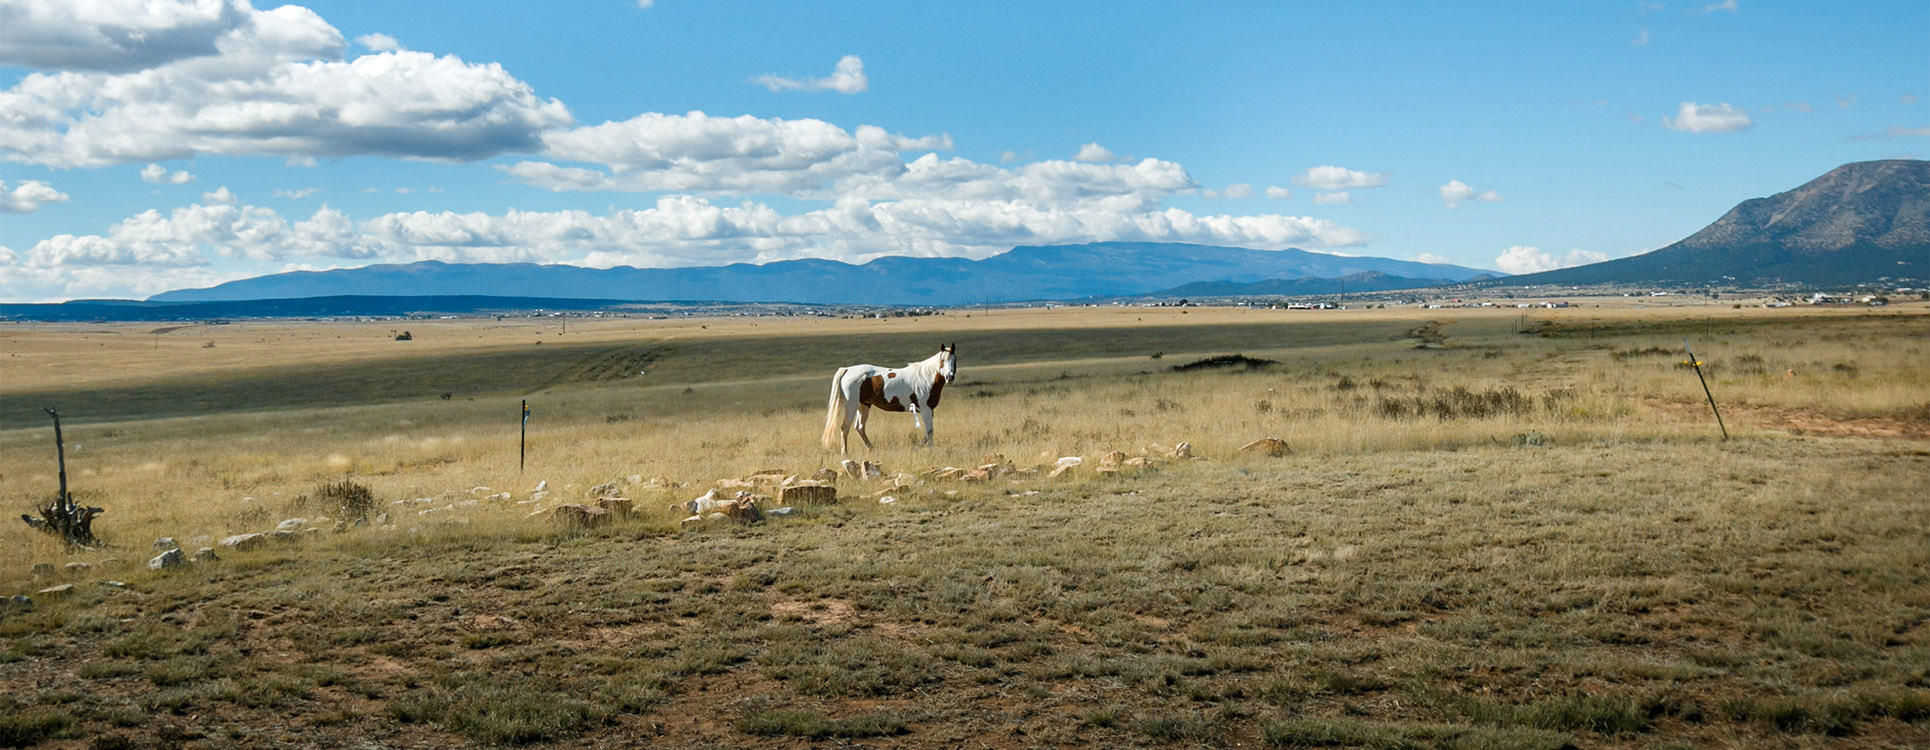 Brown and white horse in Santa Fe, NM field